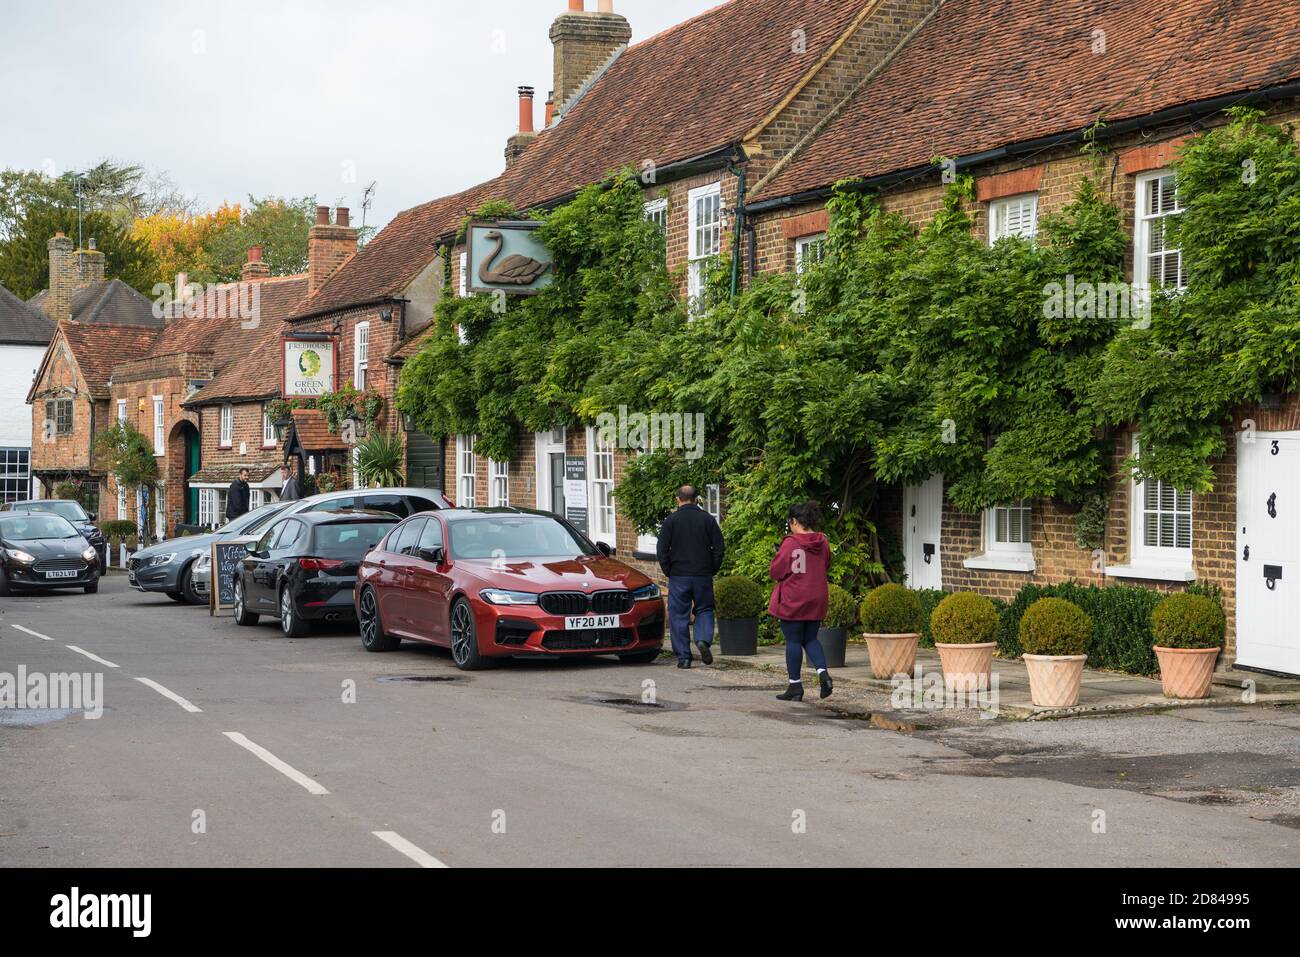 The Swan Inn and Green Man, two picturesque pubs in Denham village, Buckinghamshire, England, UK Stock Photo